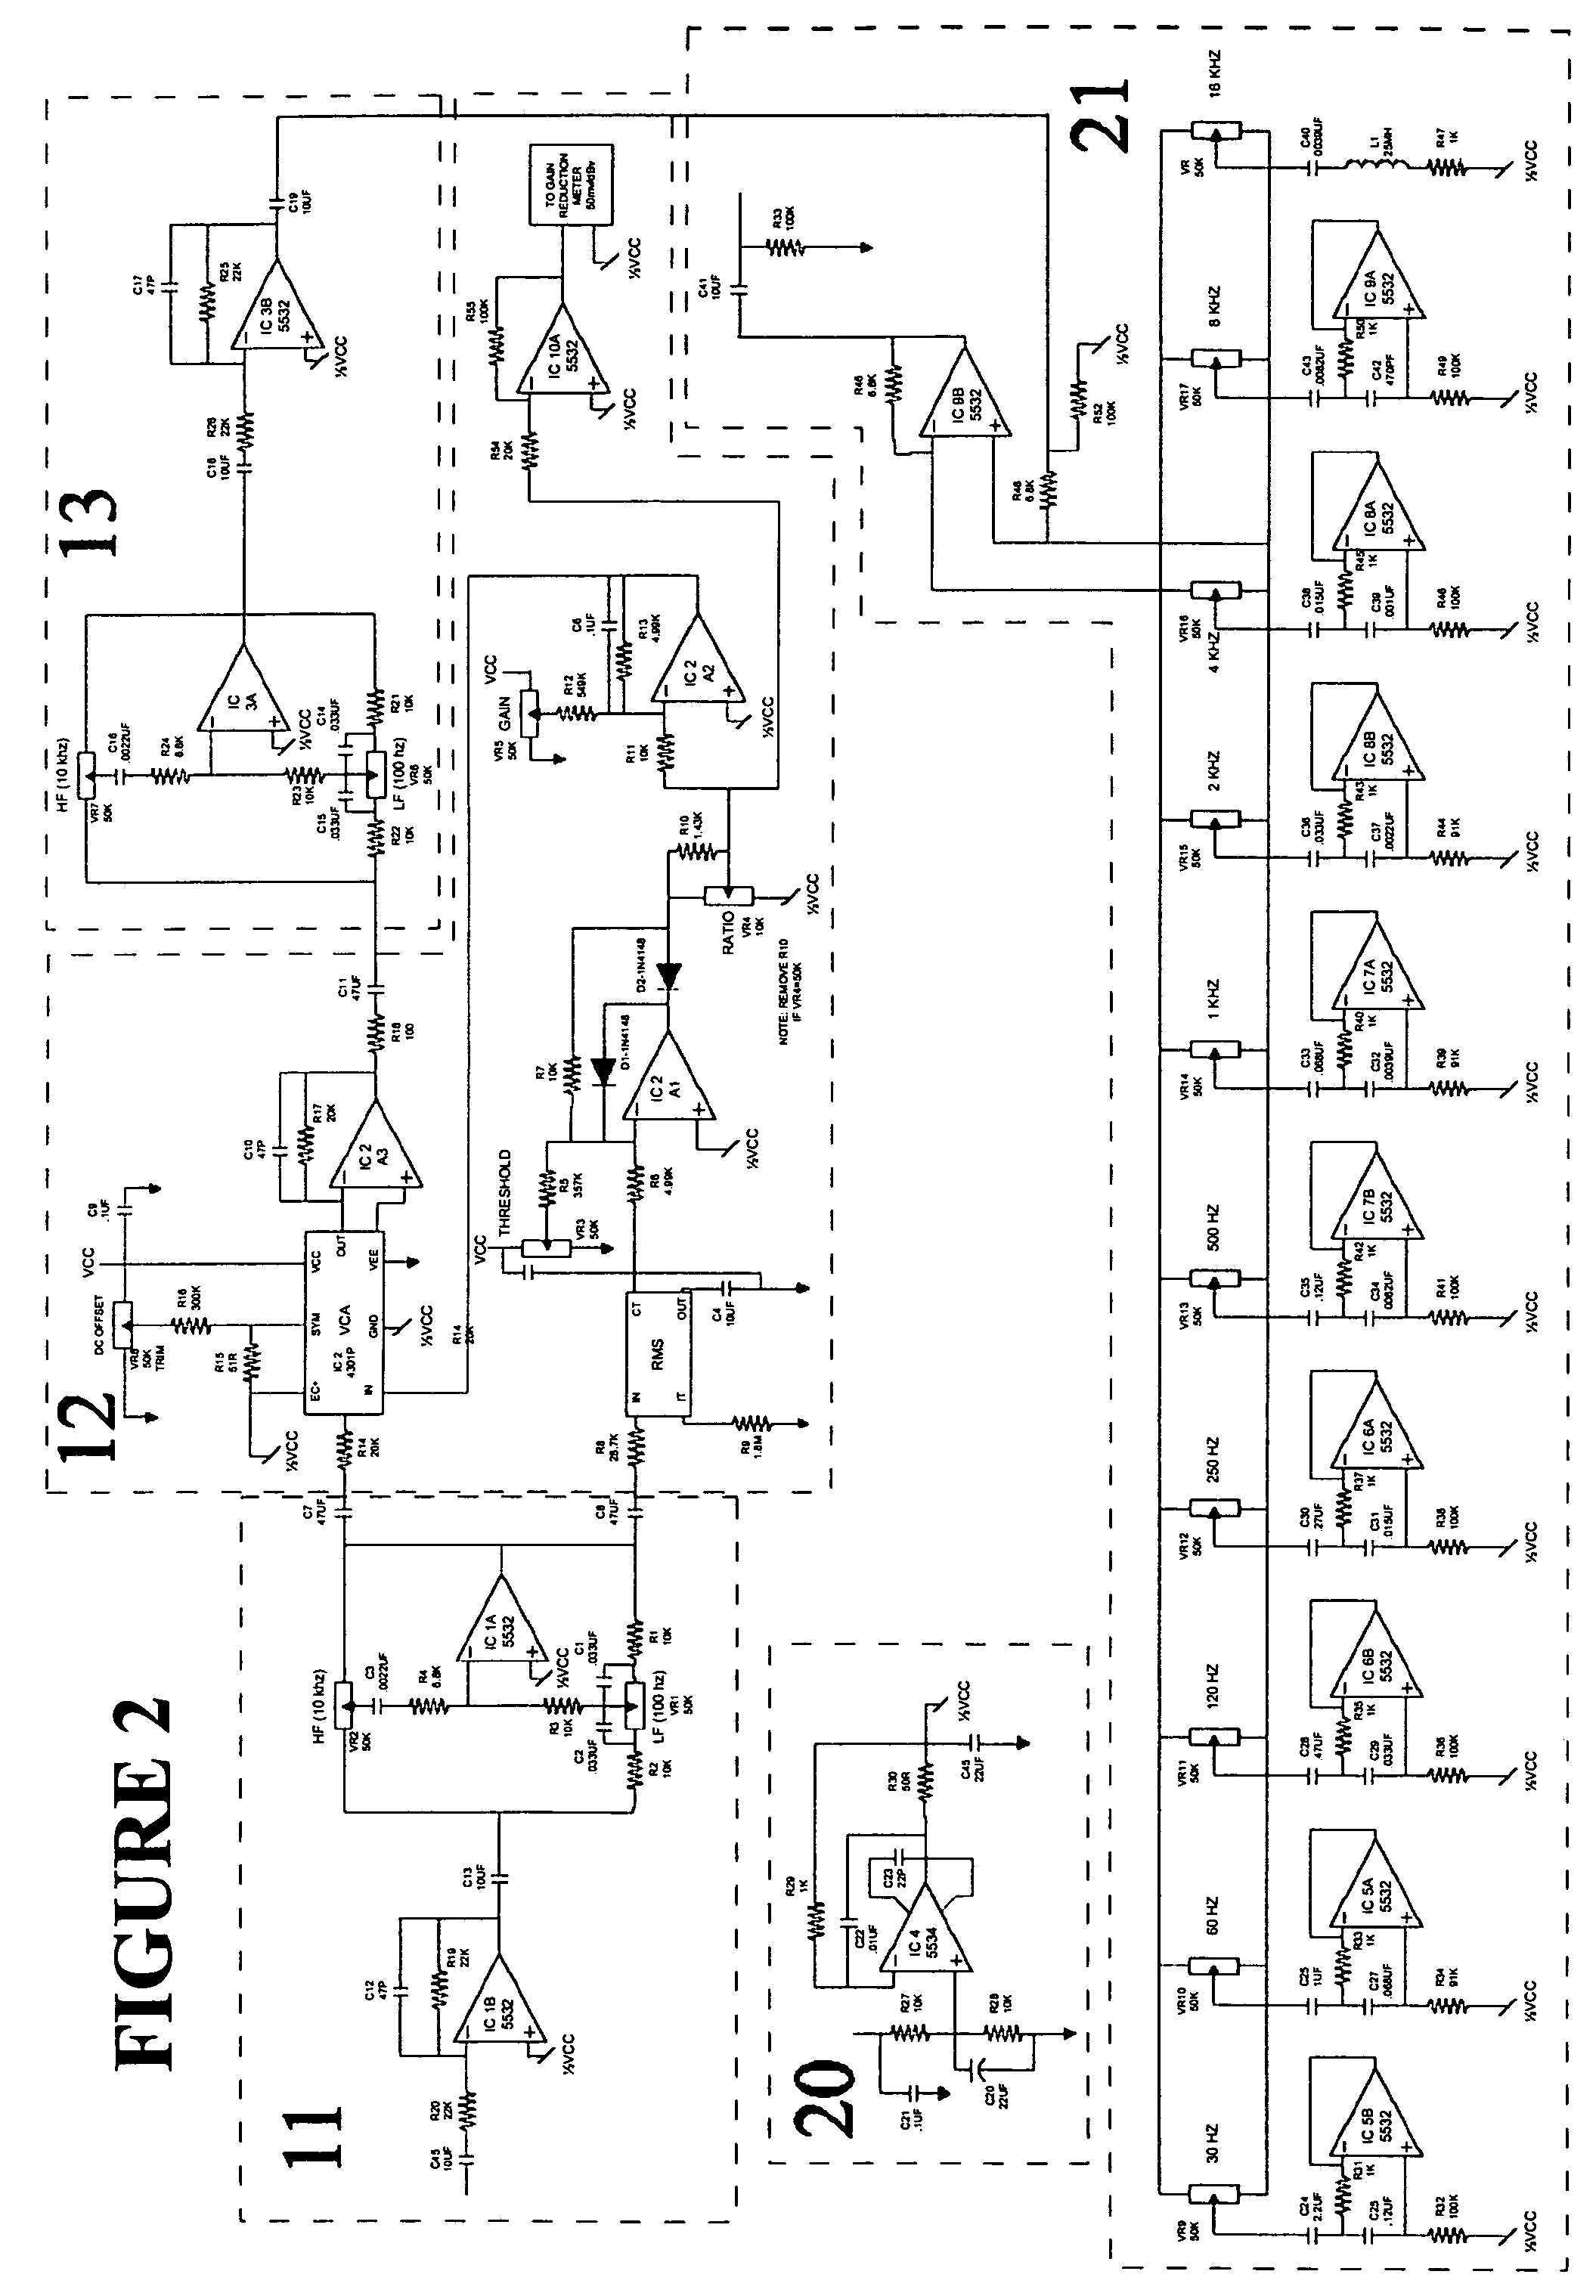 Processing of an audio signal for presentation in a high noise environment